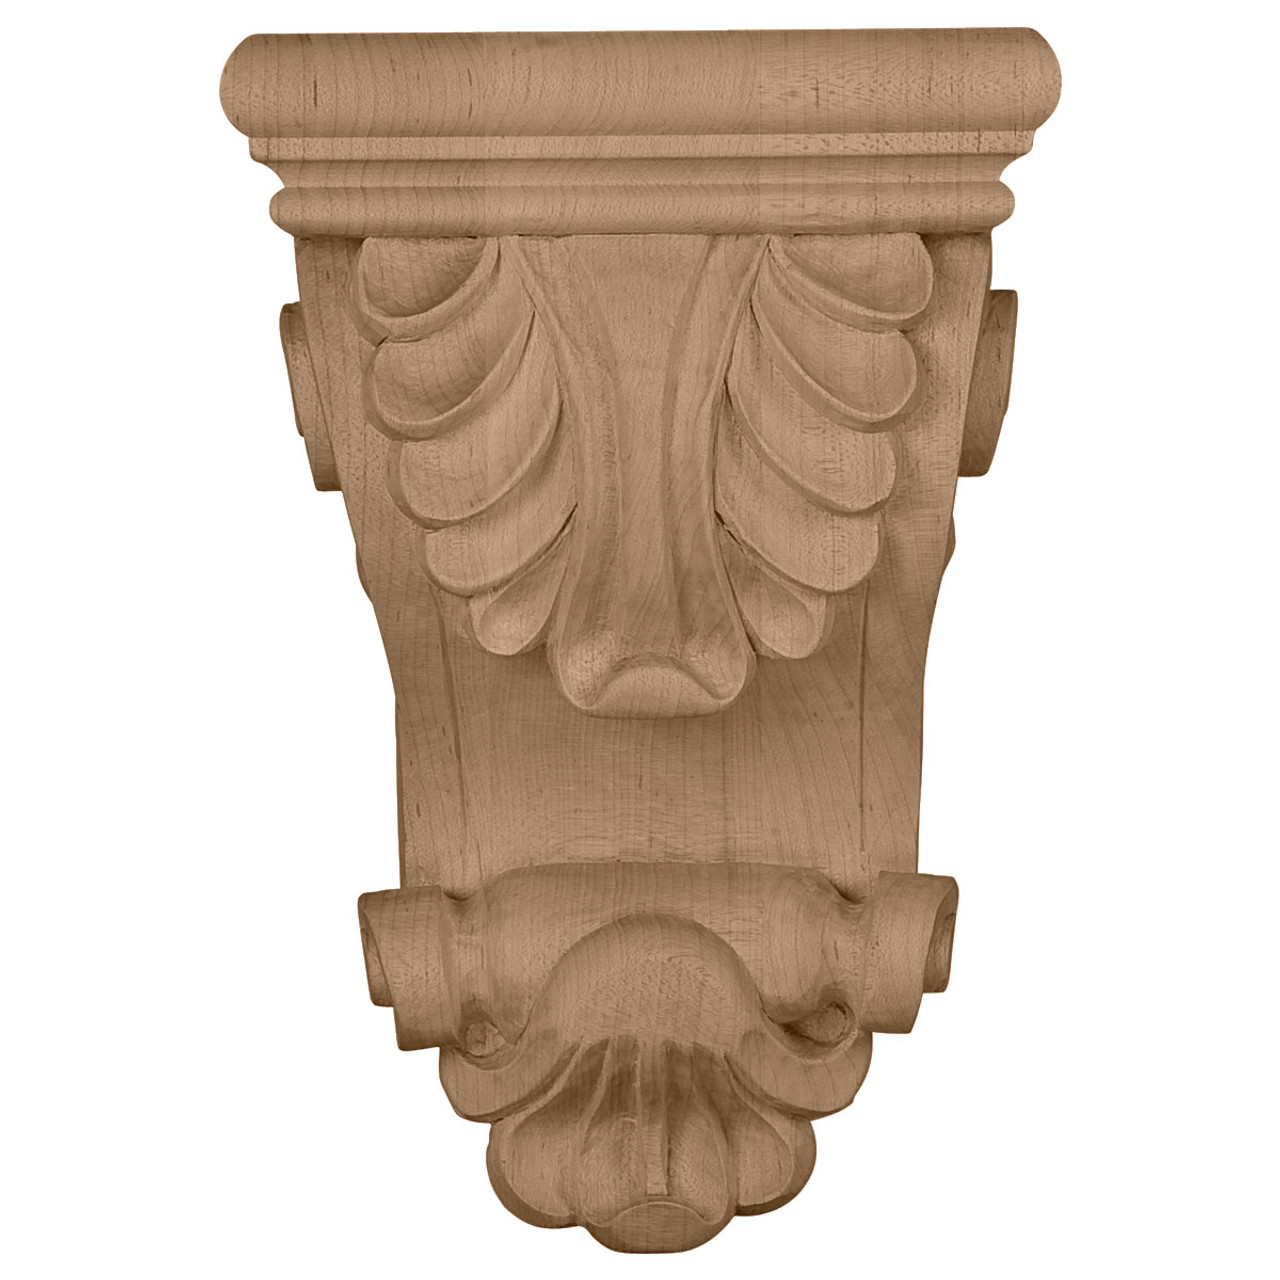 Acanthus Leaf Corbel front view